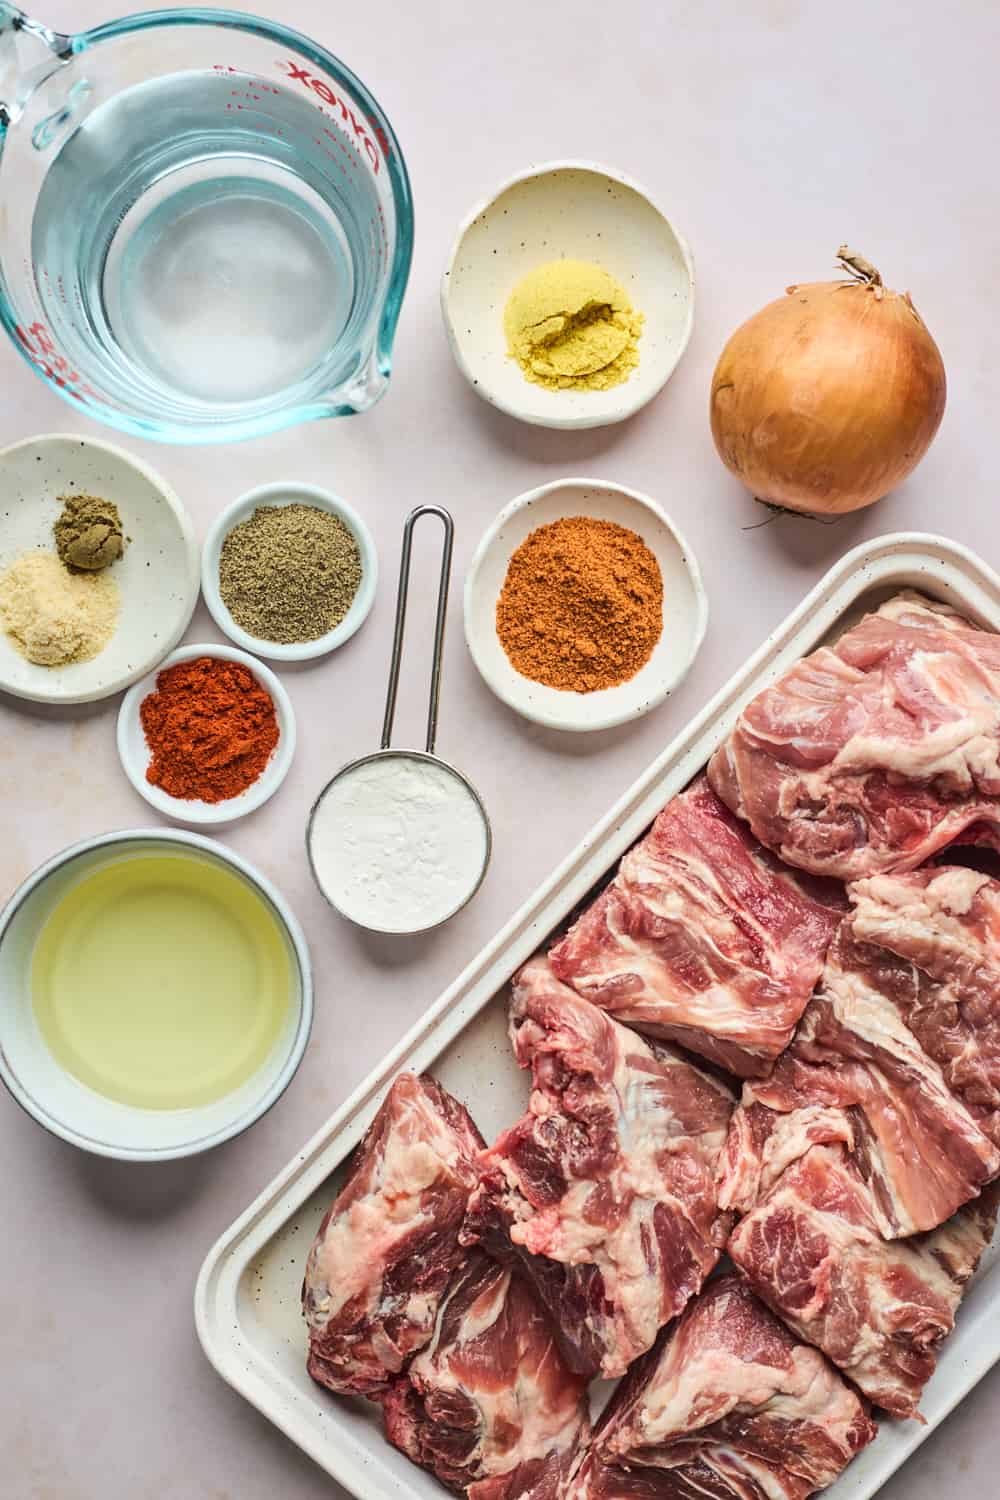 Ingredients to make roasted pork necks in small bowls on the counter.